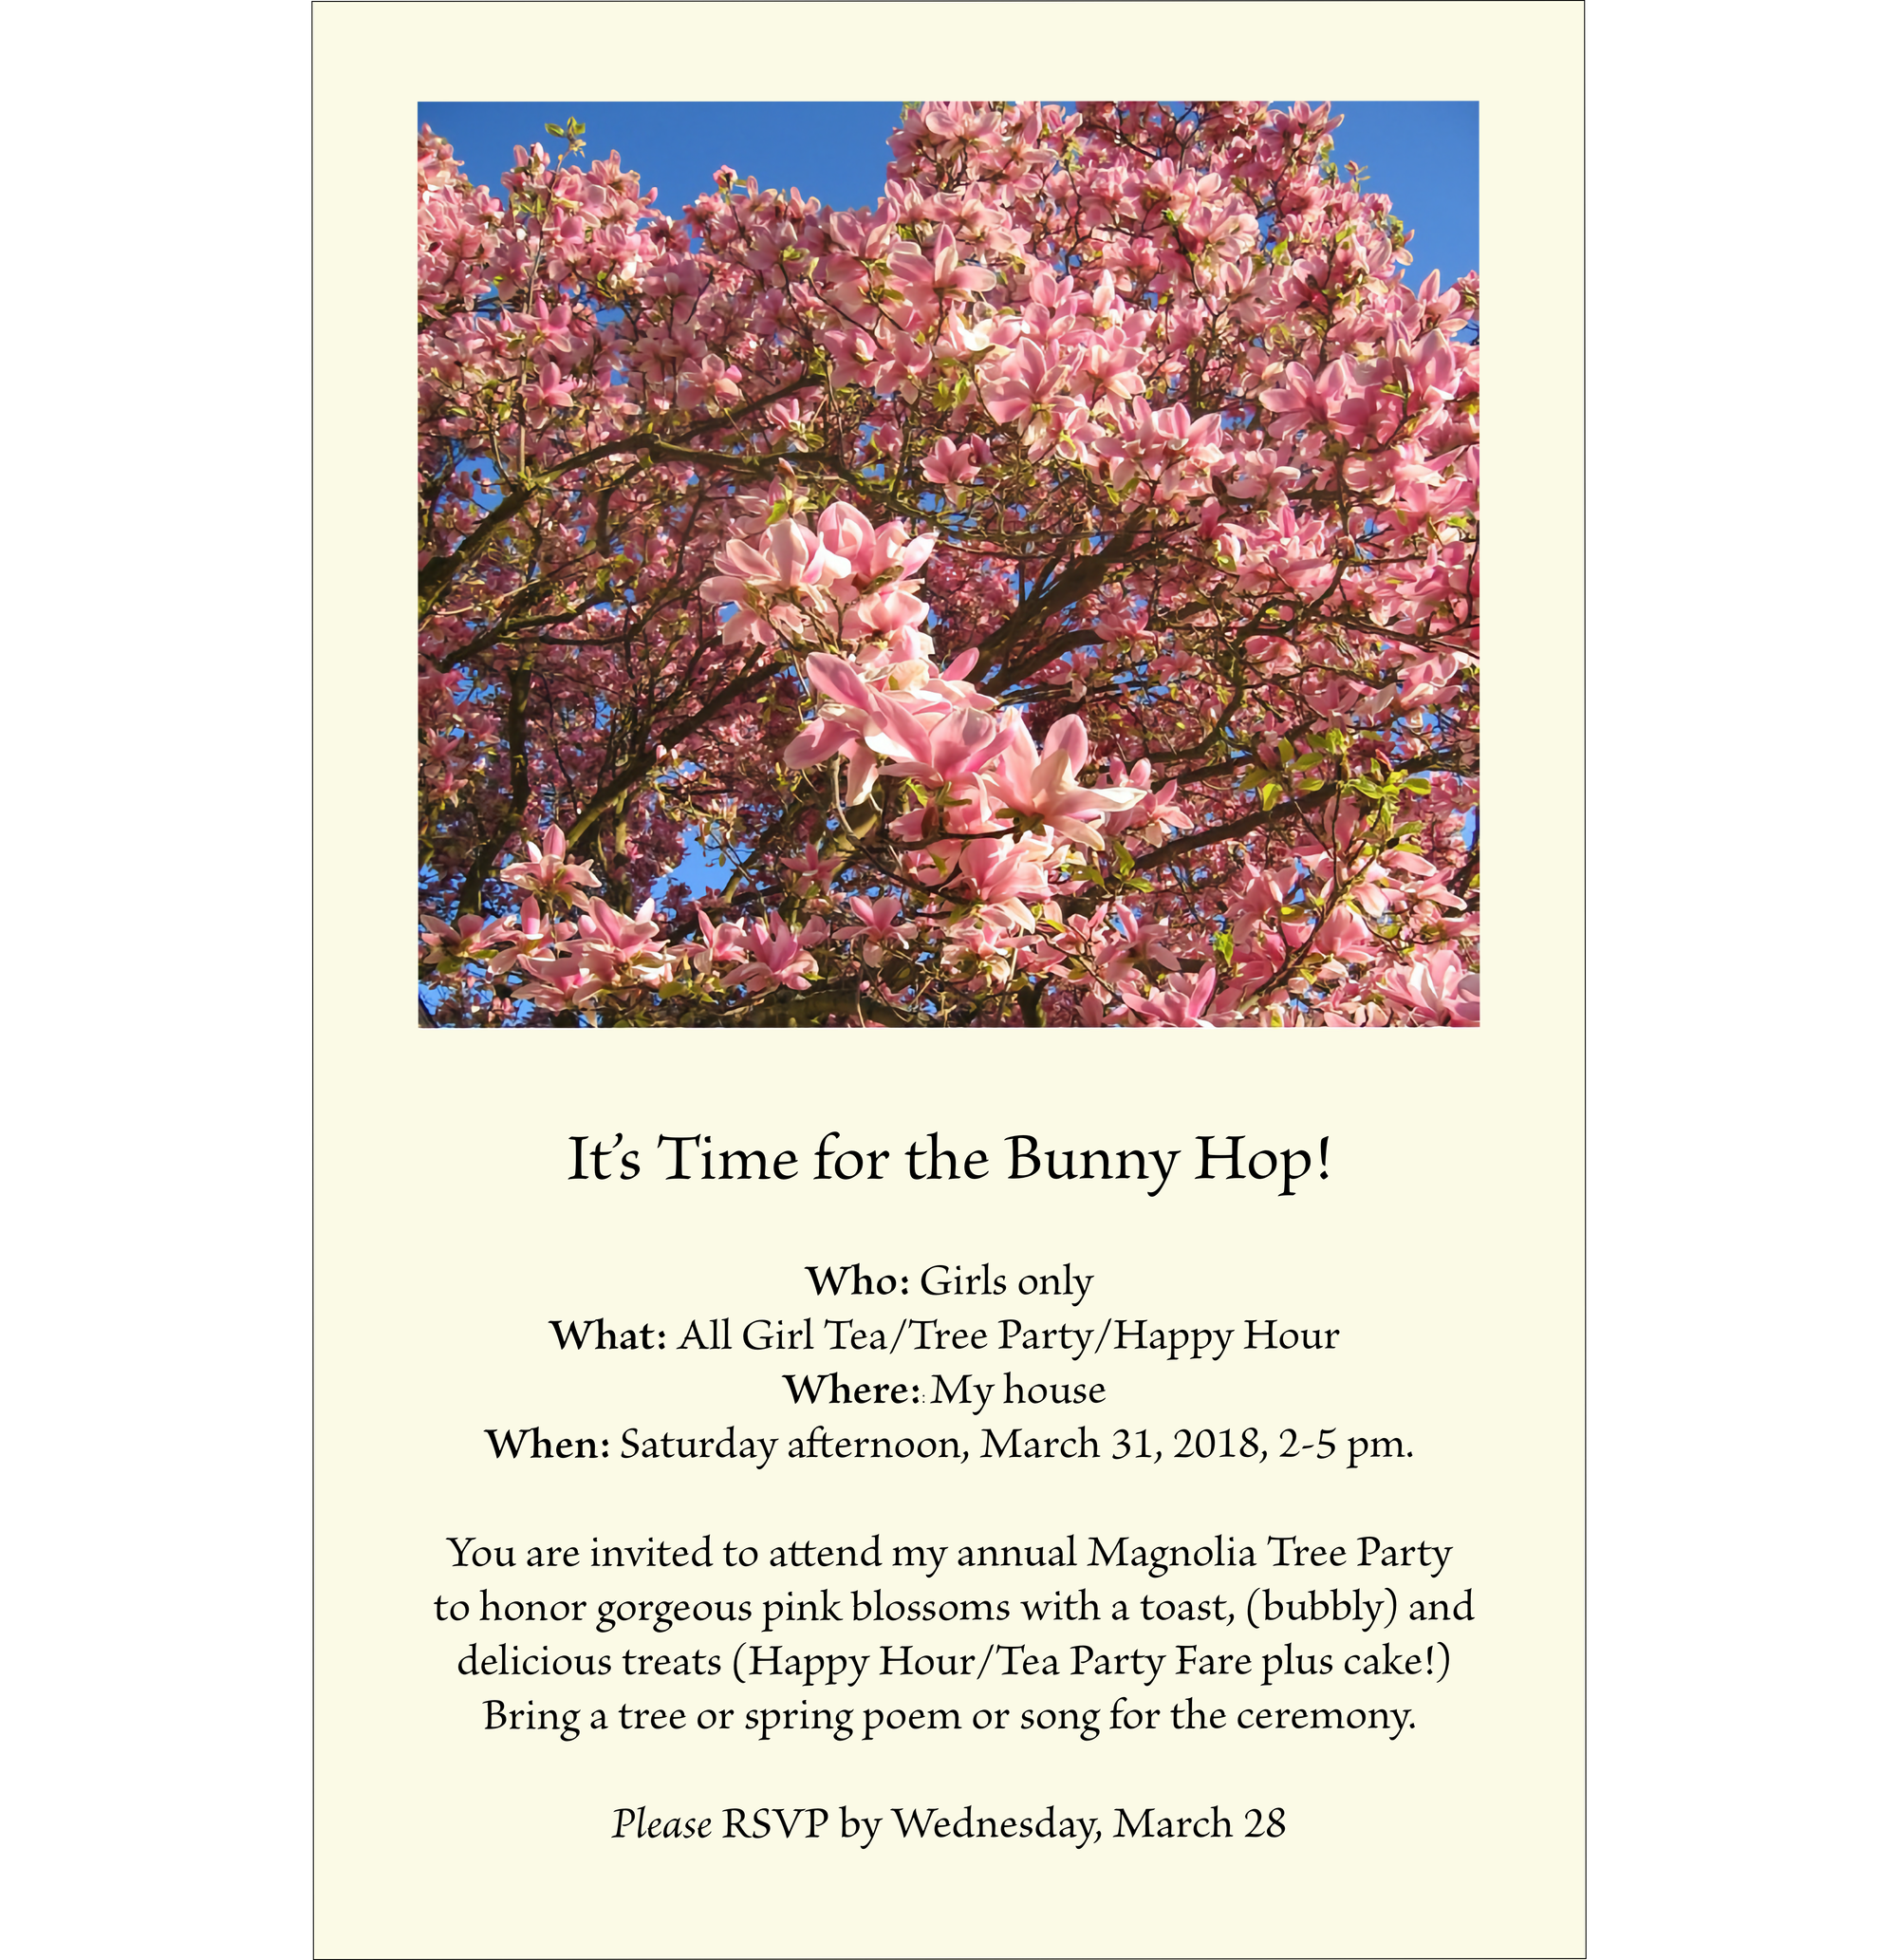 Image of Tree Party invitation: "It's Time for the Bunny Hop", with close-up photo of magnolia